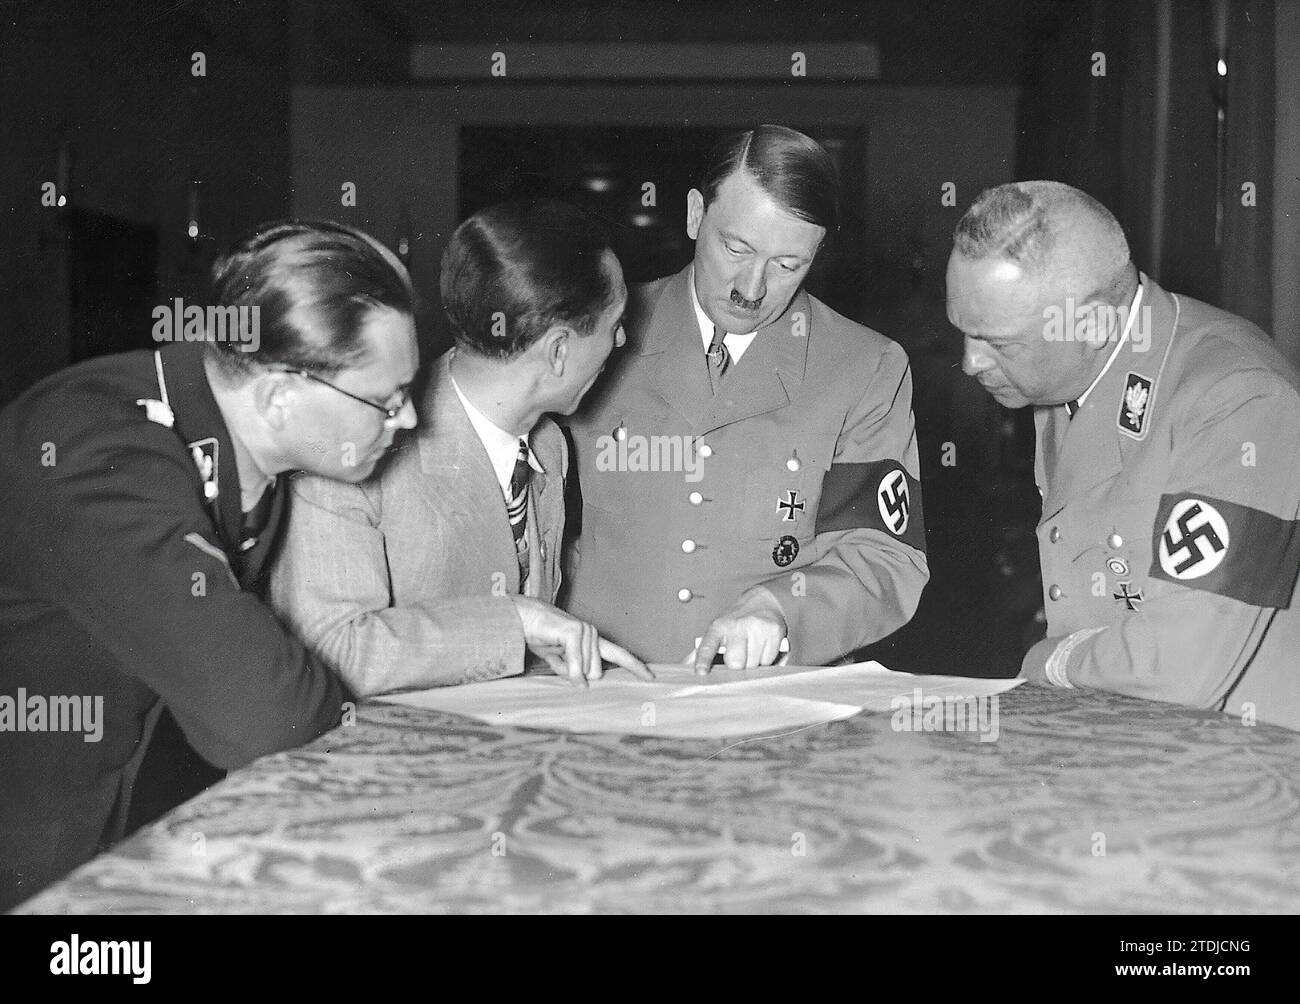 Berlin, 03/29/1936. During the elections the 'führer', Adolf Hitler, compares the first electoral results with those of the previous elections. In the photo from left to right: Director General Bouhler, Minister Goebbels, Adolf Hitler and Minister Kerrl. Credit: Album / Archivo ABC / José Díaz Casariego Stock Photo